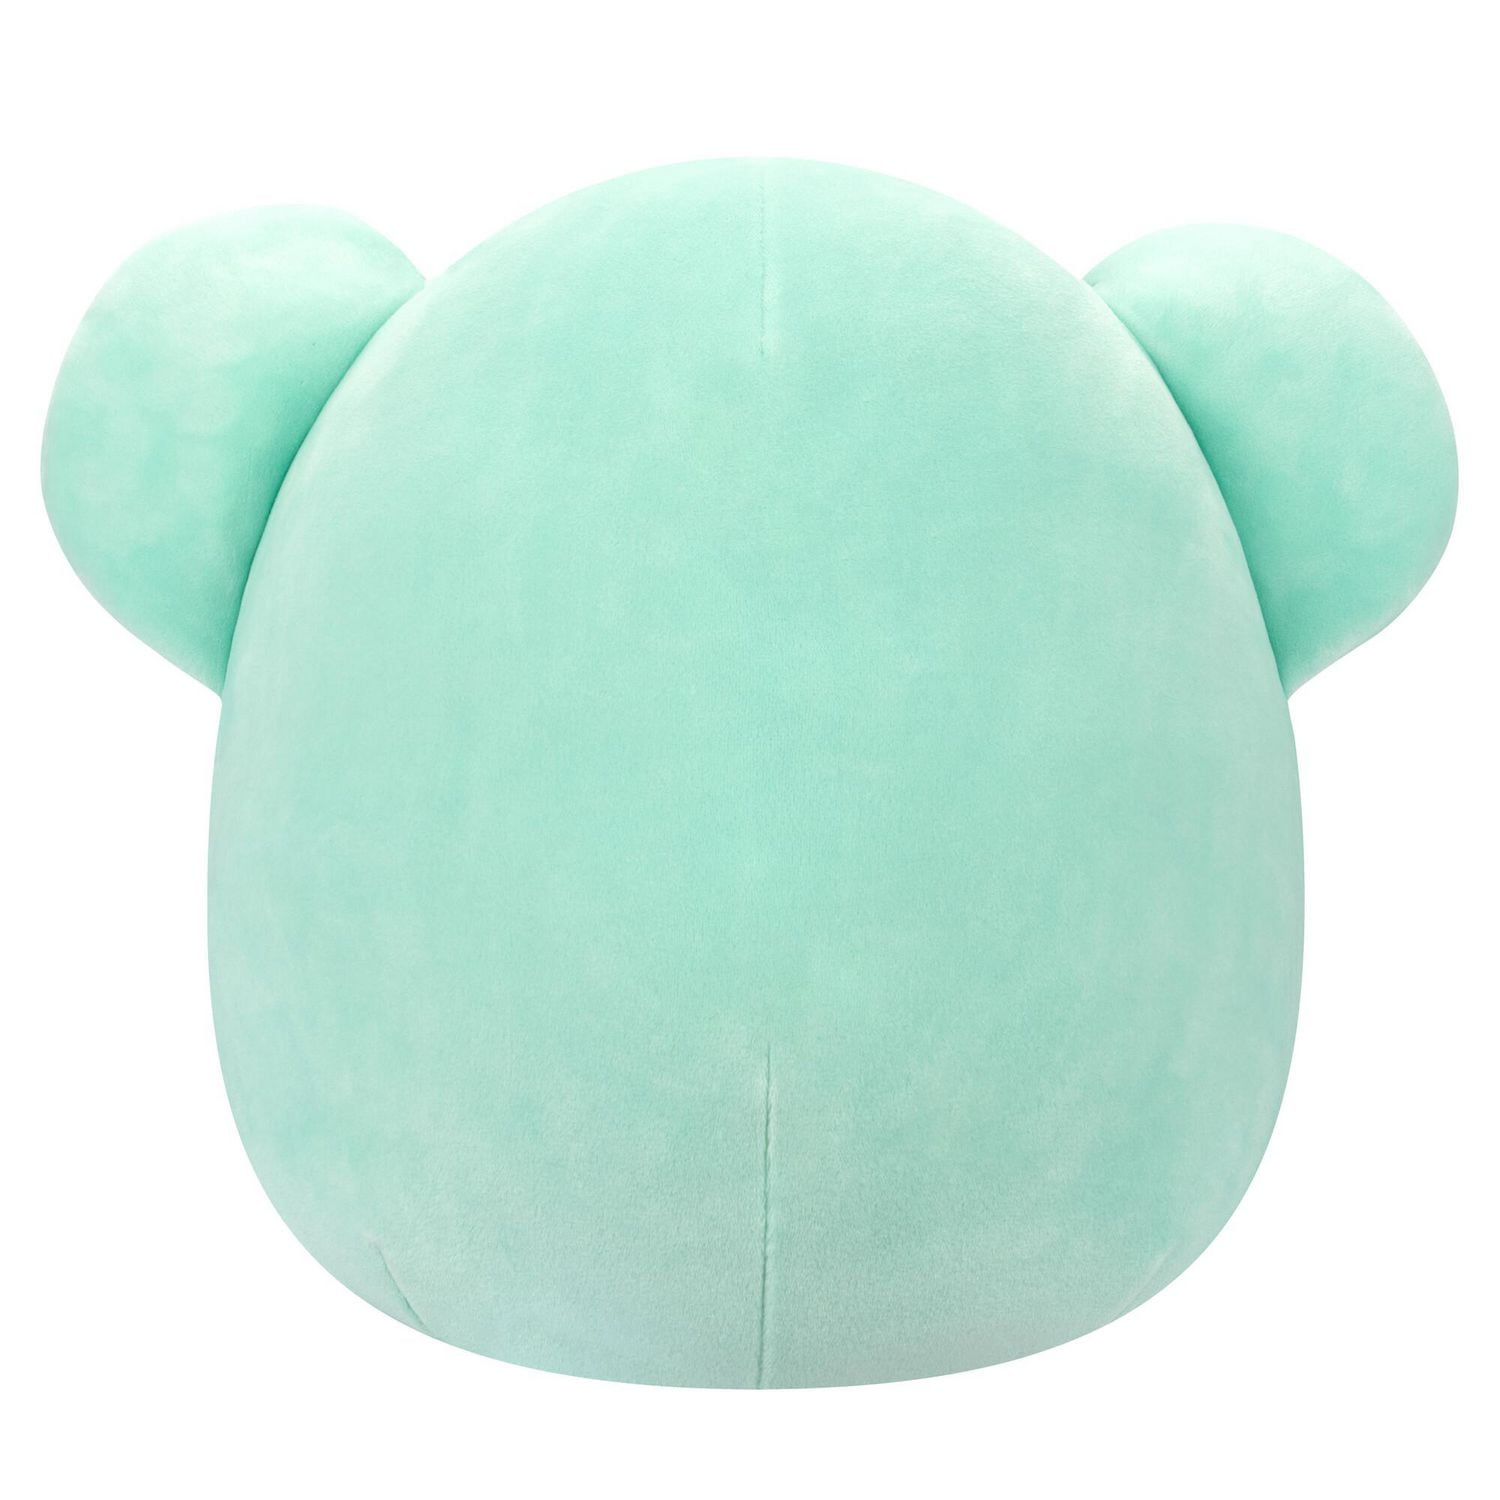 Squishmallows - Coco the Mint Green Koala with White Belly and White Ears 